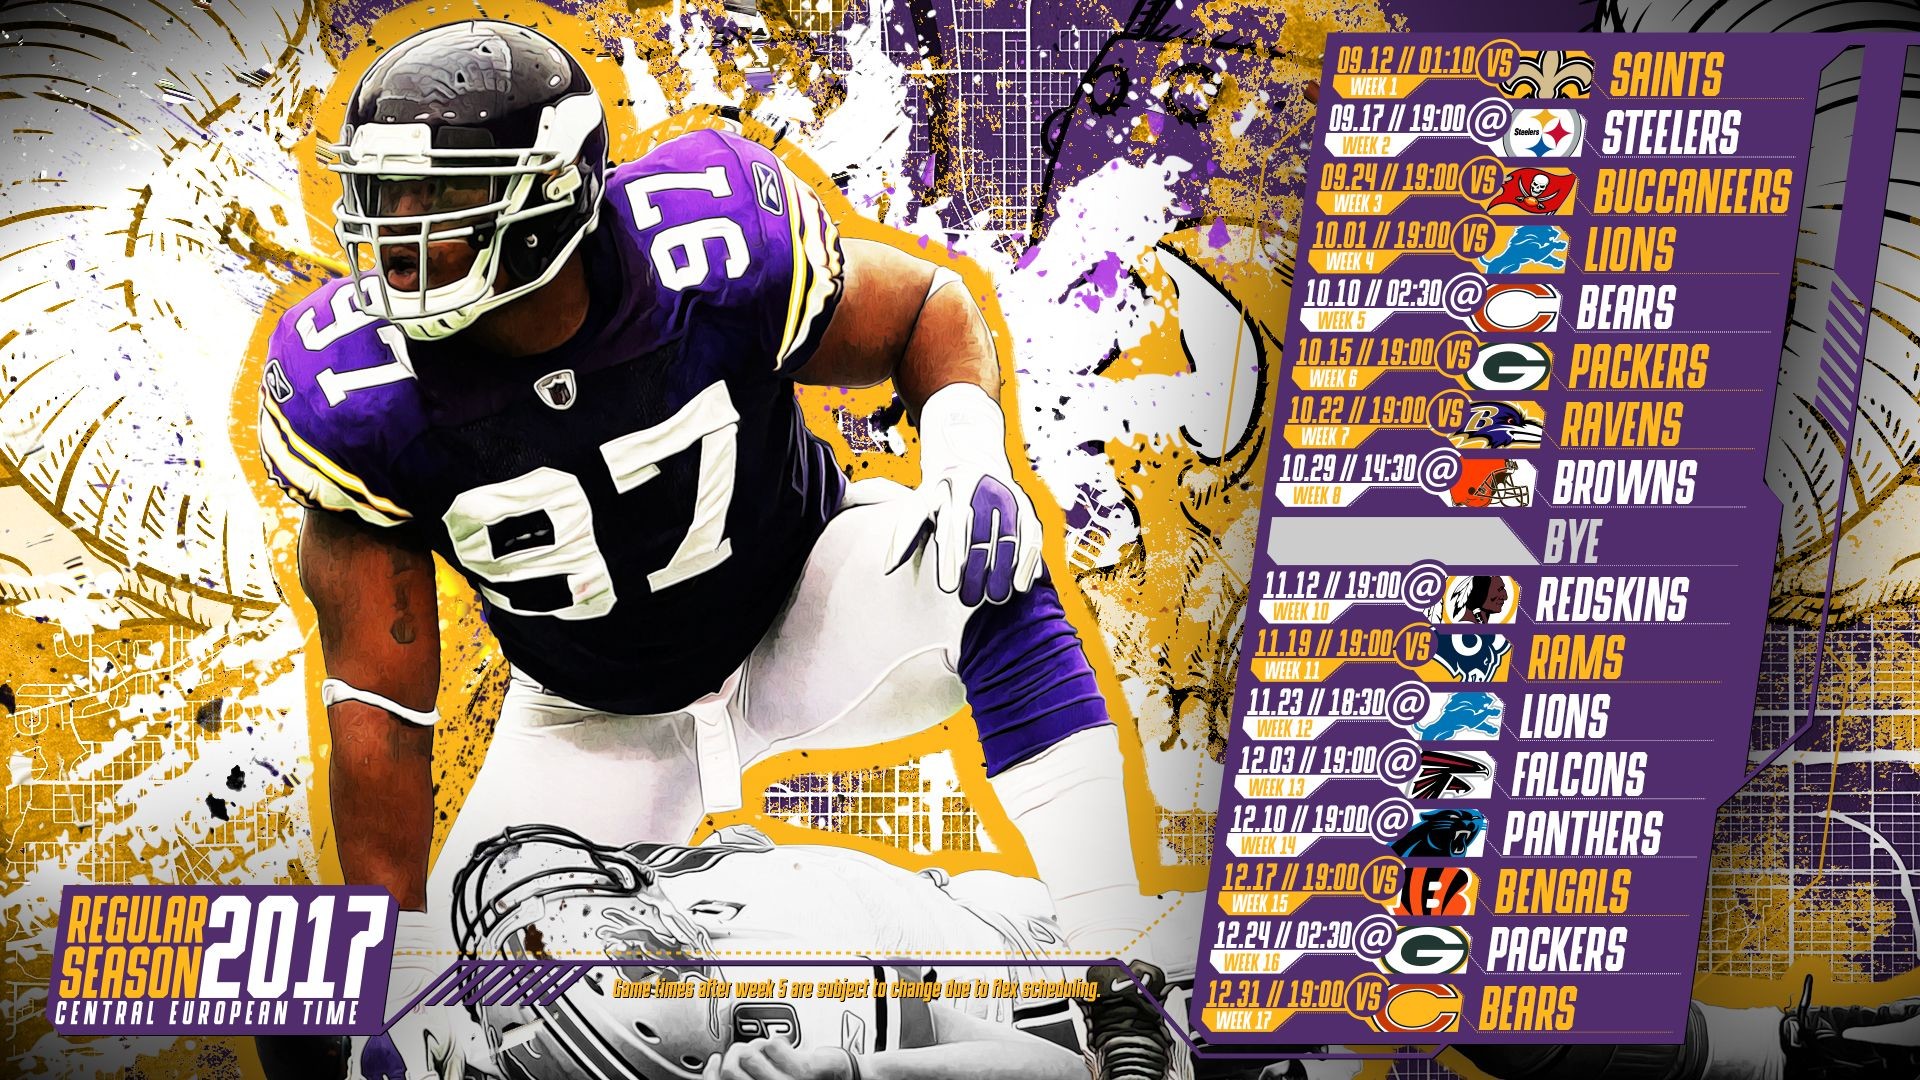 1920x1080 Schedule wallpaper for the Minnesota Vikings Regular Season, 2017 Central  European Time. Made by #tgersdiy